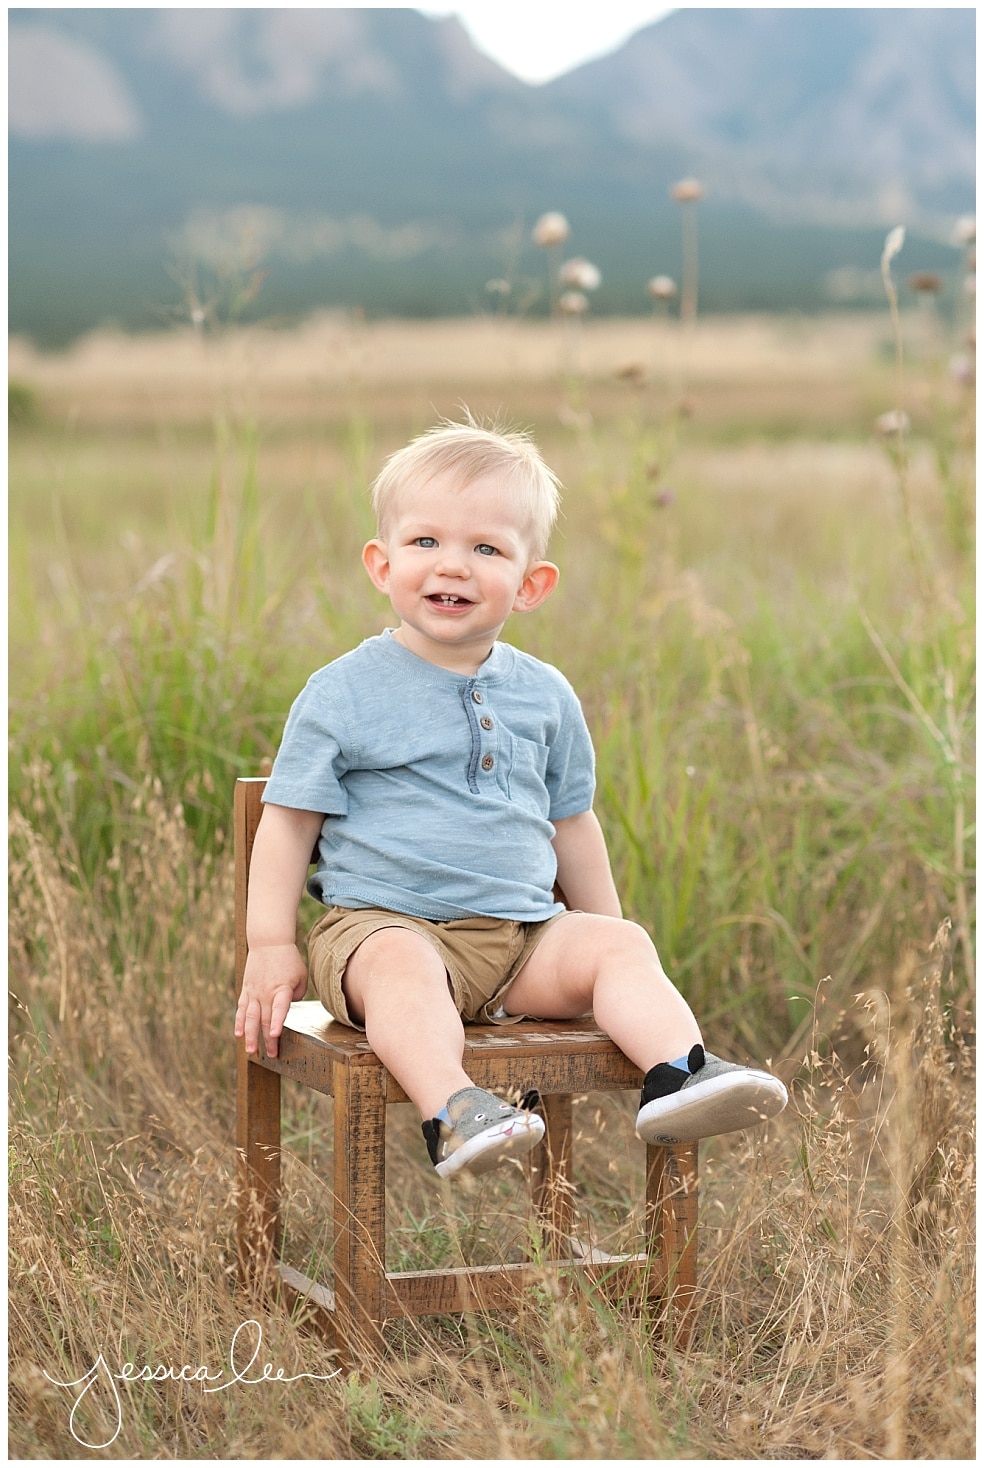 Lafayette Colorado Family Photographer, Jessica Lee Photography, 1 year old sitting in chair